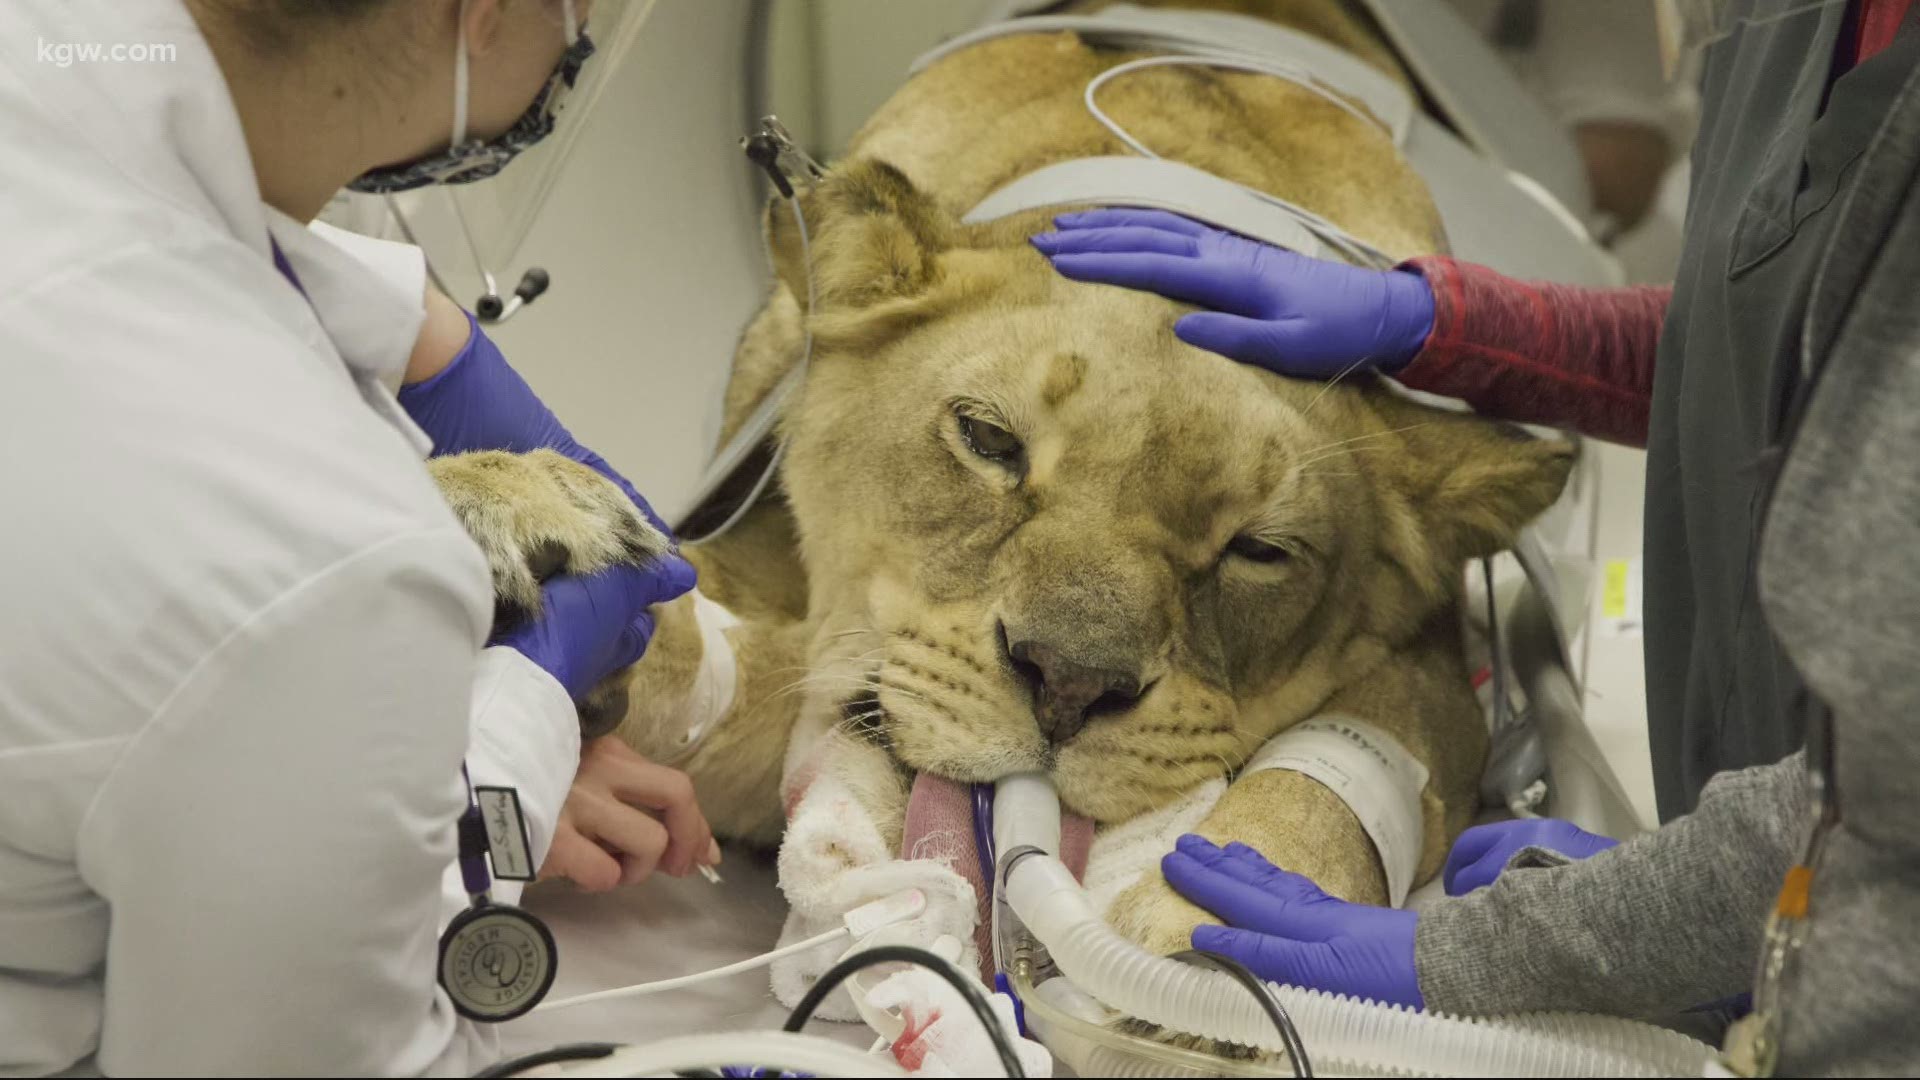 The 5-year-old lioness, Chobe, had a uterus infection but is on her way to recovery thanks to the vet hospital at Oregon State University.